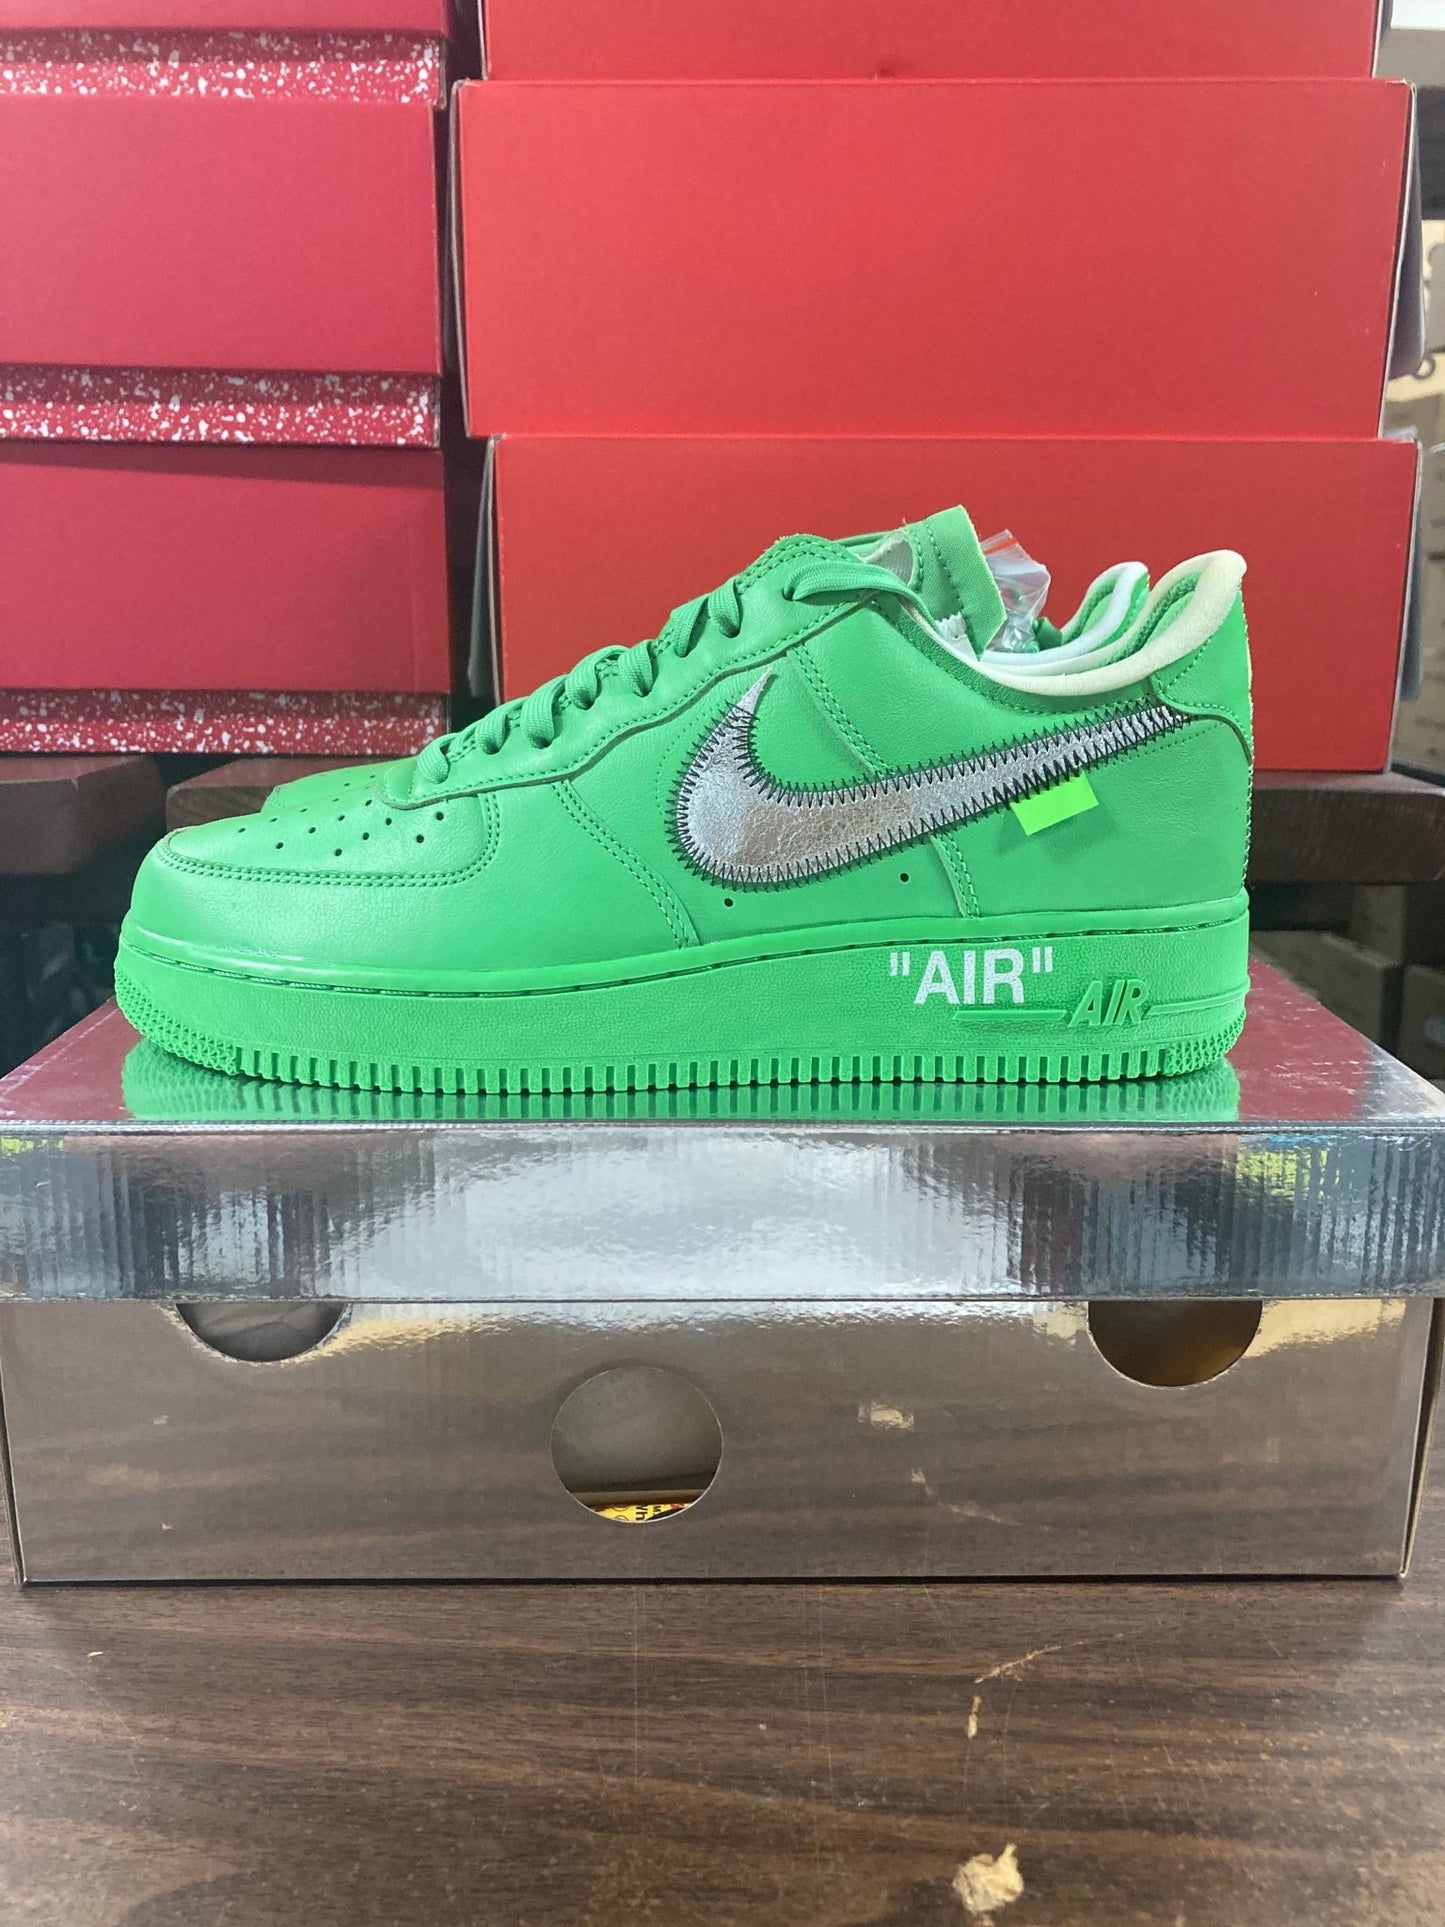 BRAND NEW NIKE X OFF-WHITE AIR FORCE 1 LOW SP BROOKLYN DX1419-300 - SIZE 12